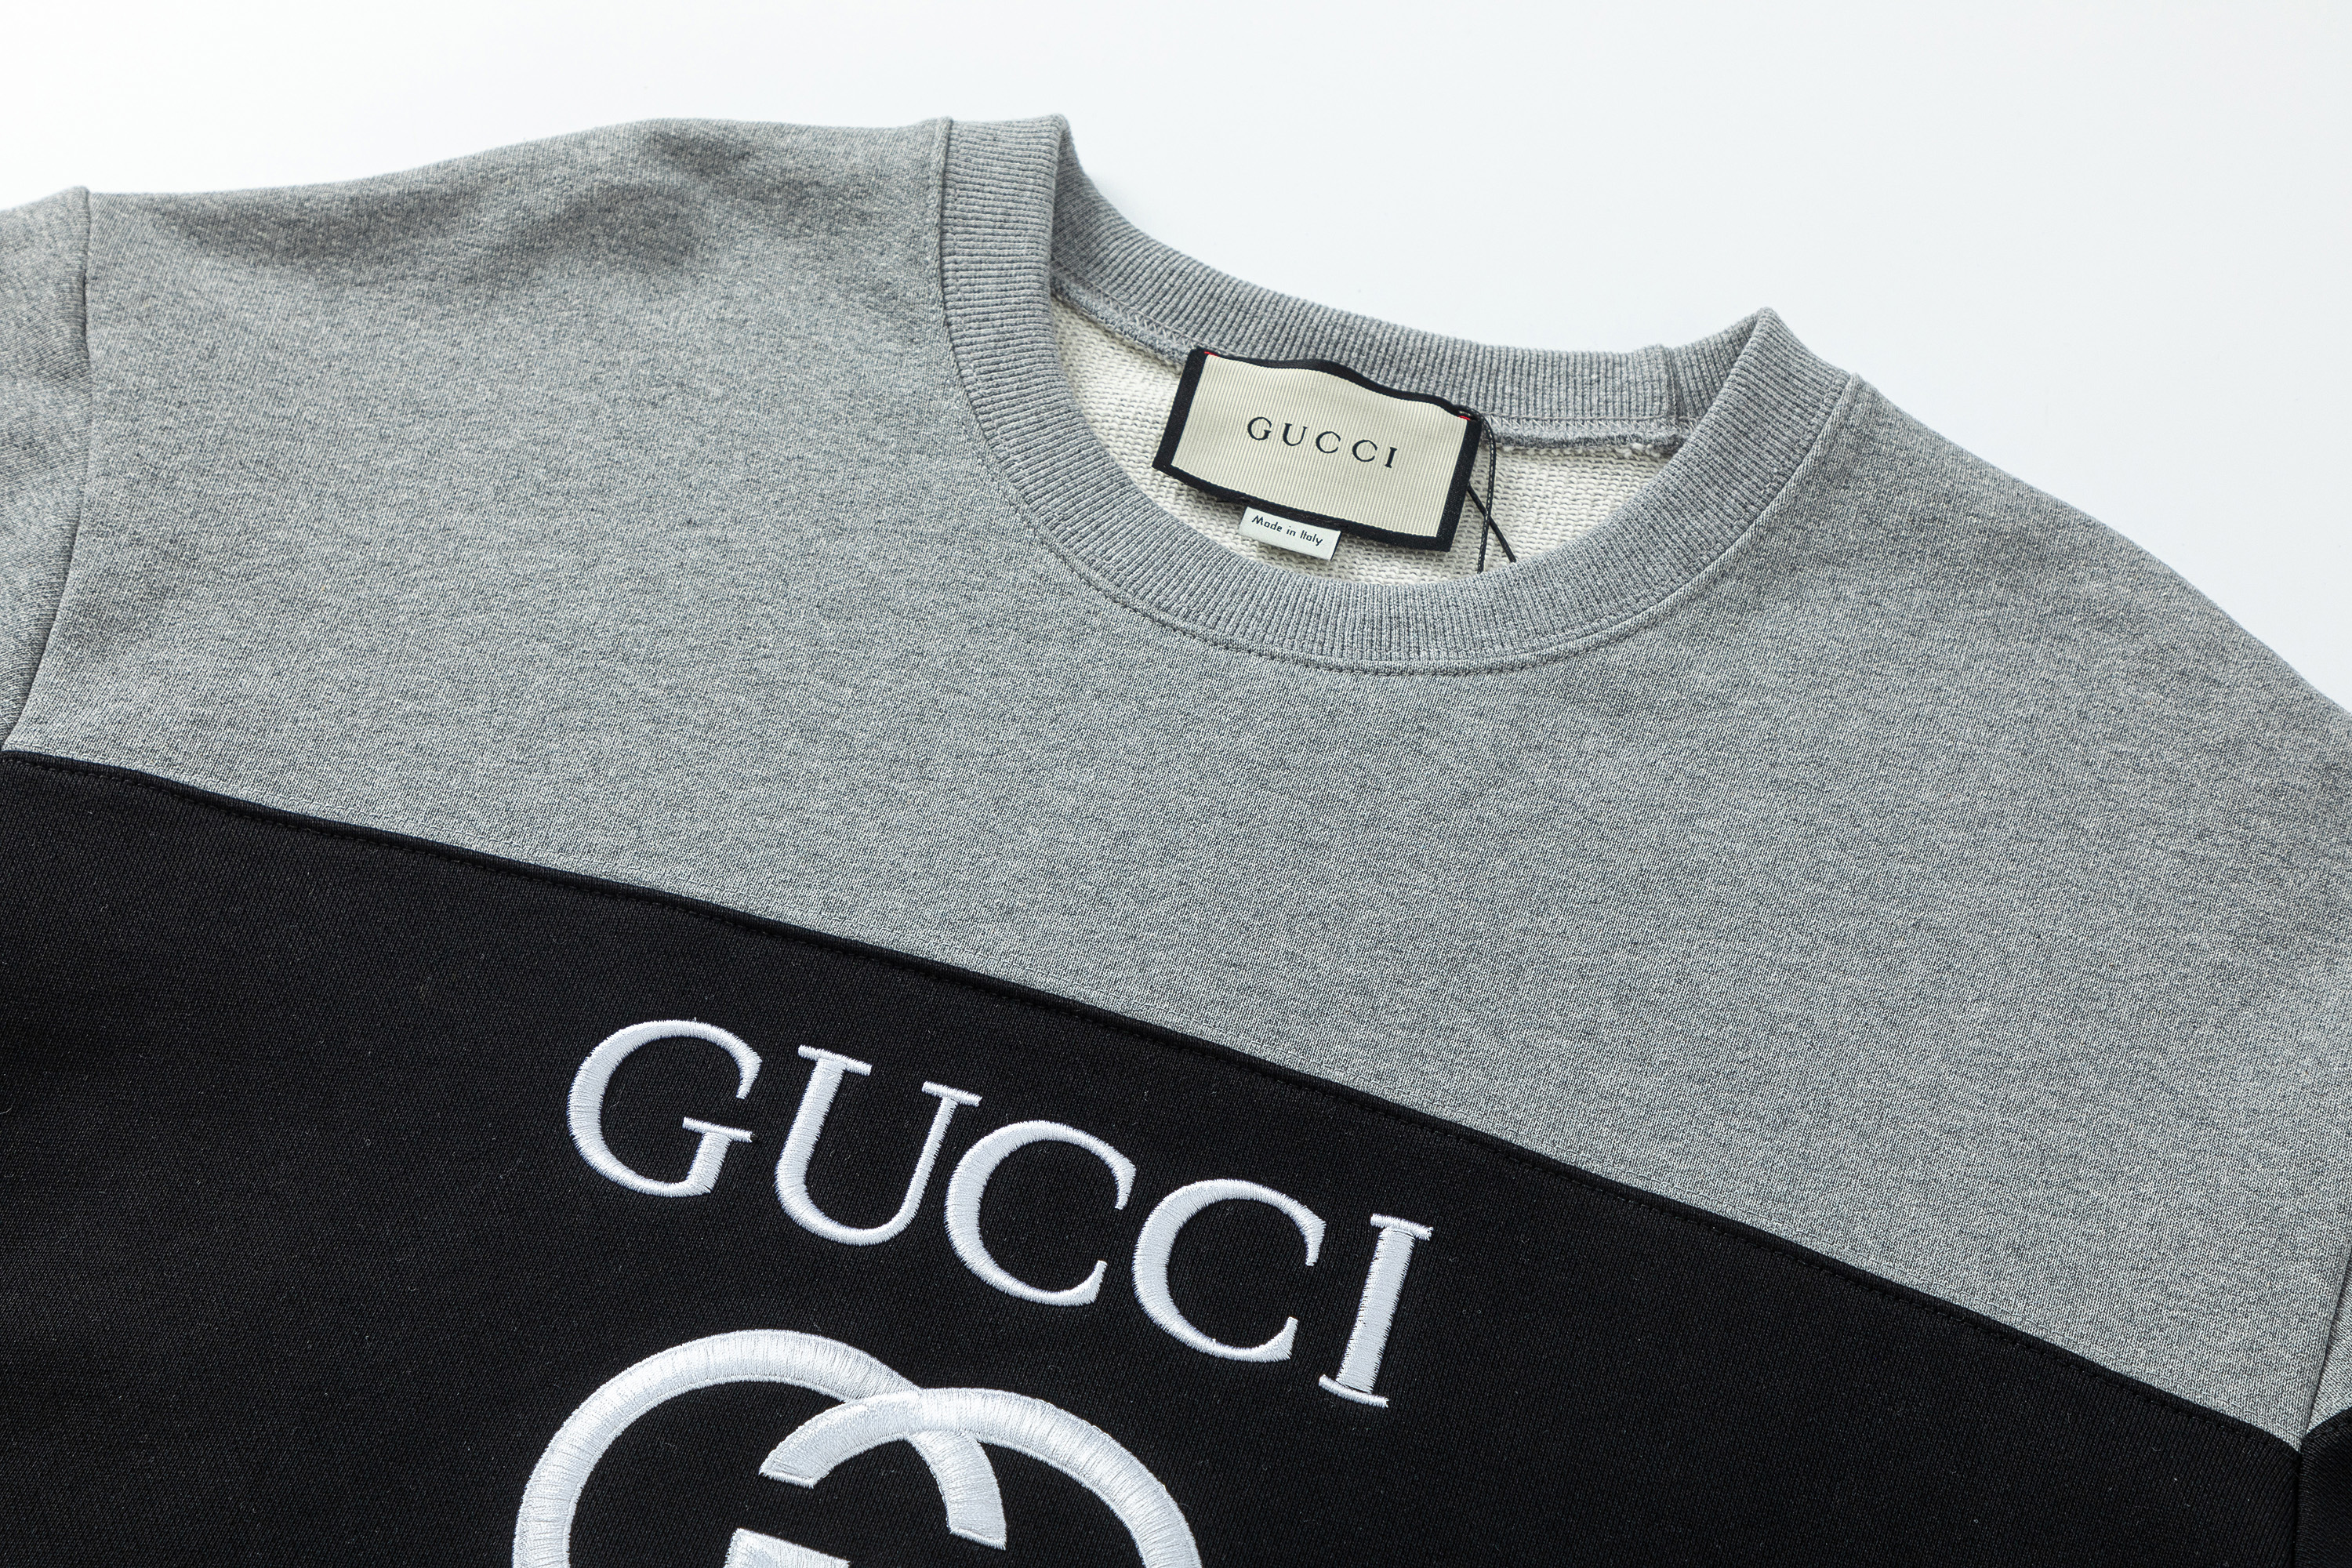 Gucci Sweatshirts For Men # 263595, cheap Gucci Hoodies, only $46!